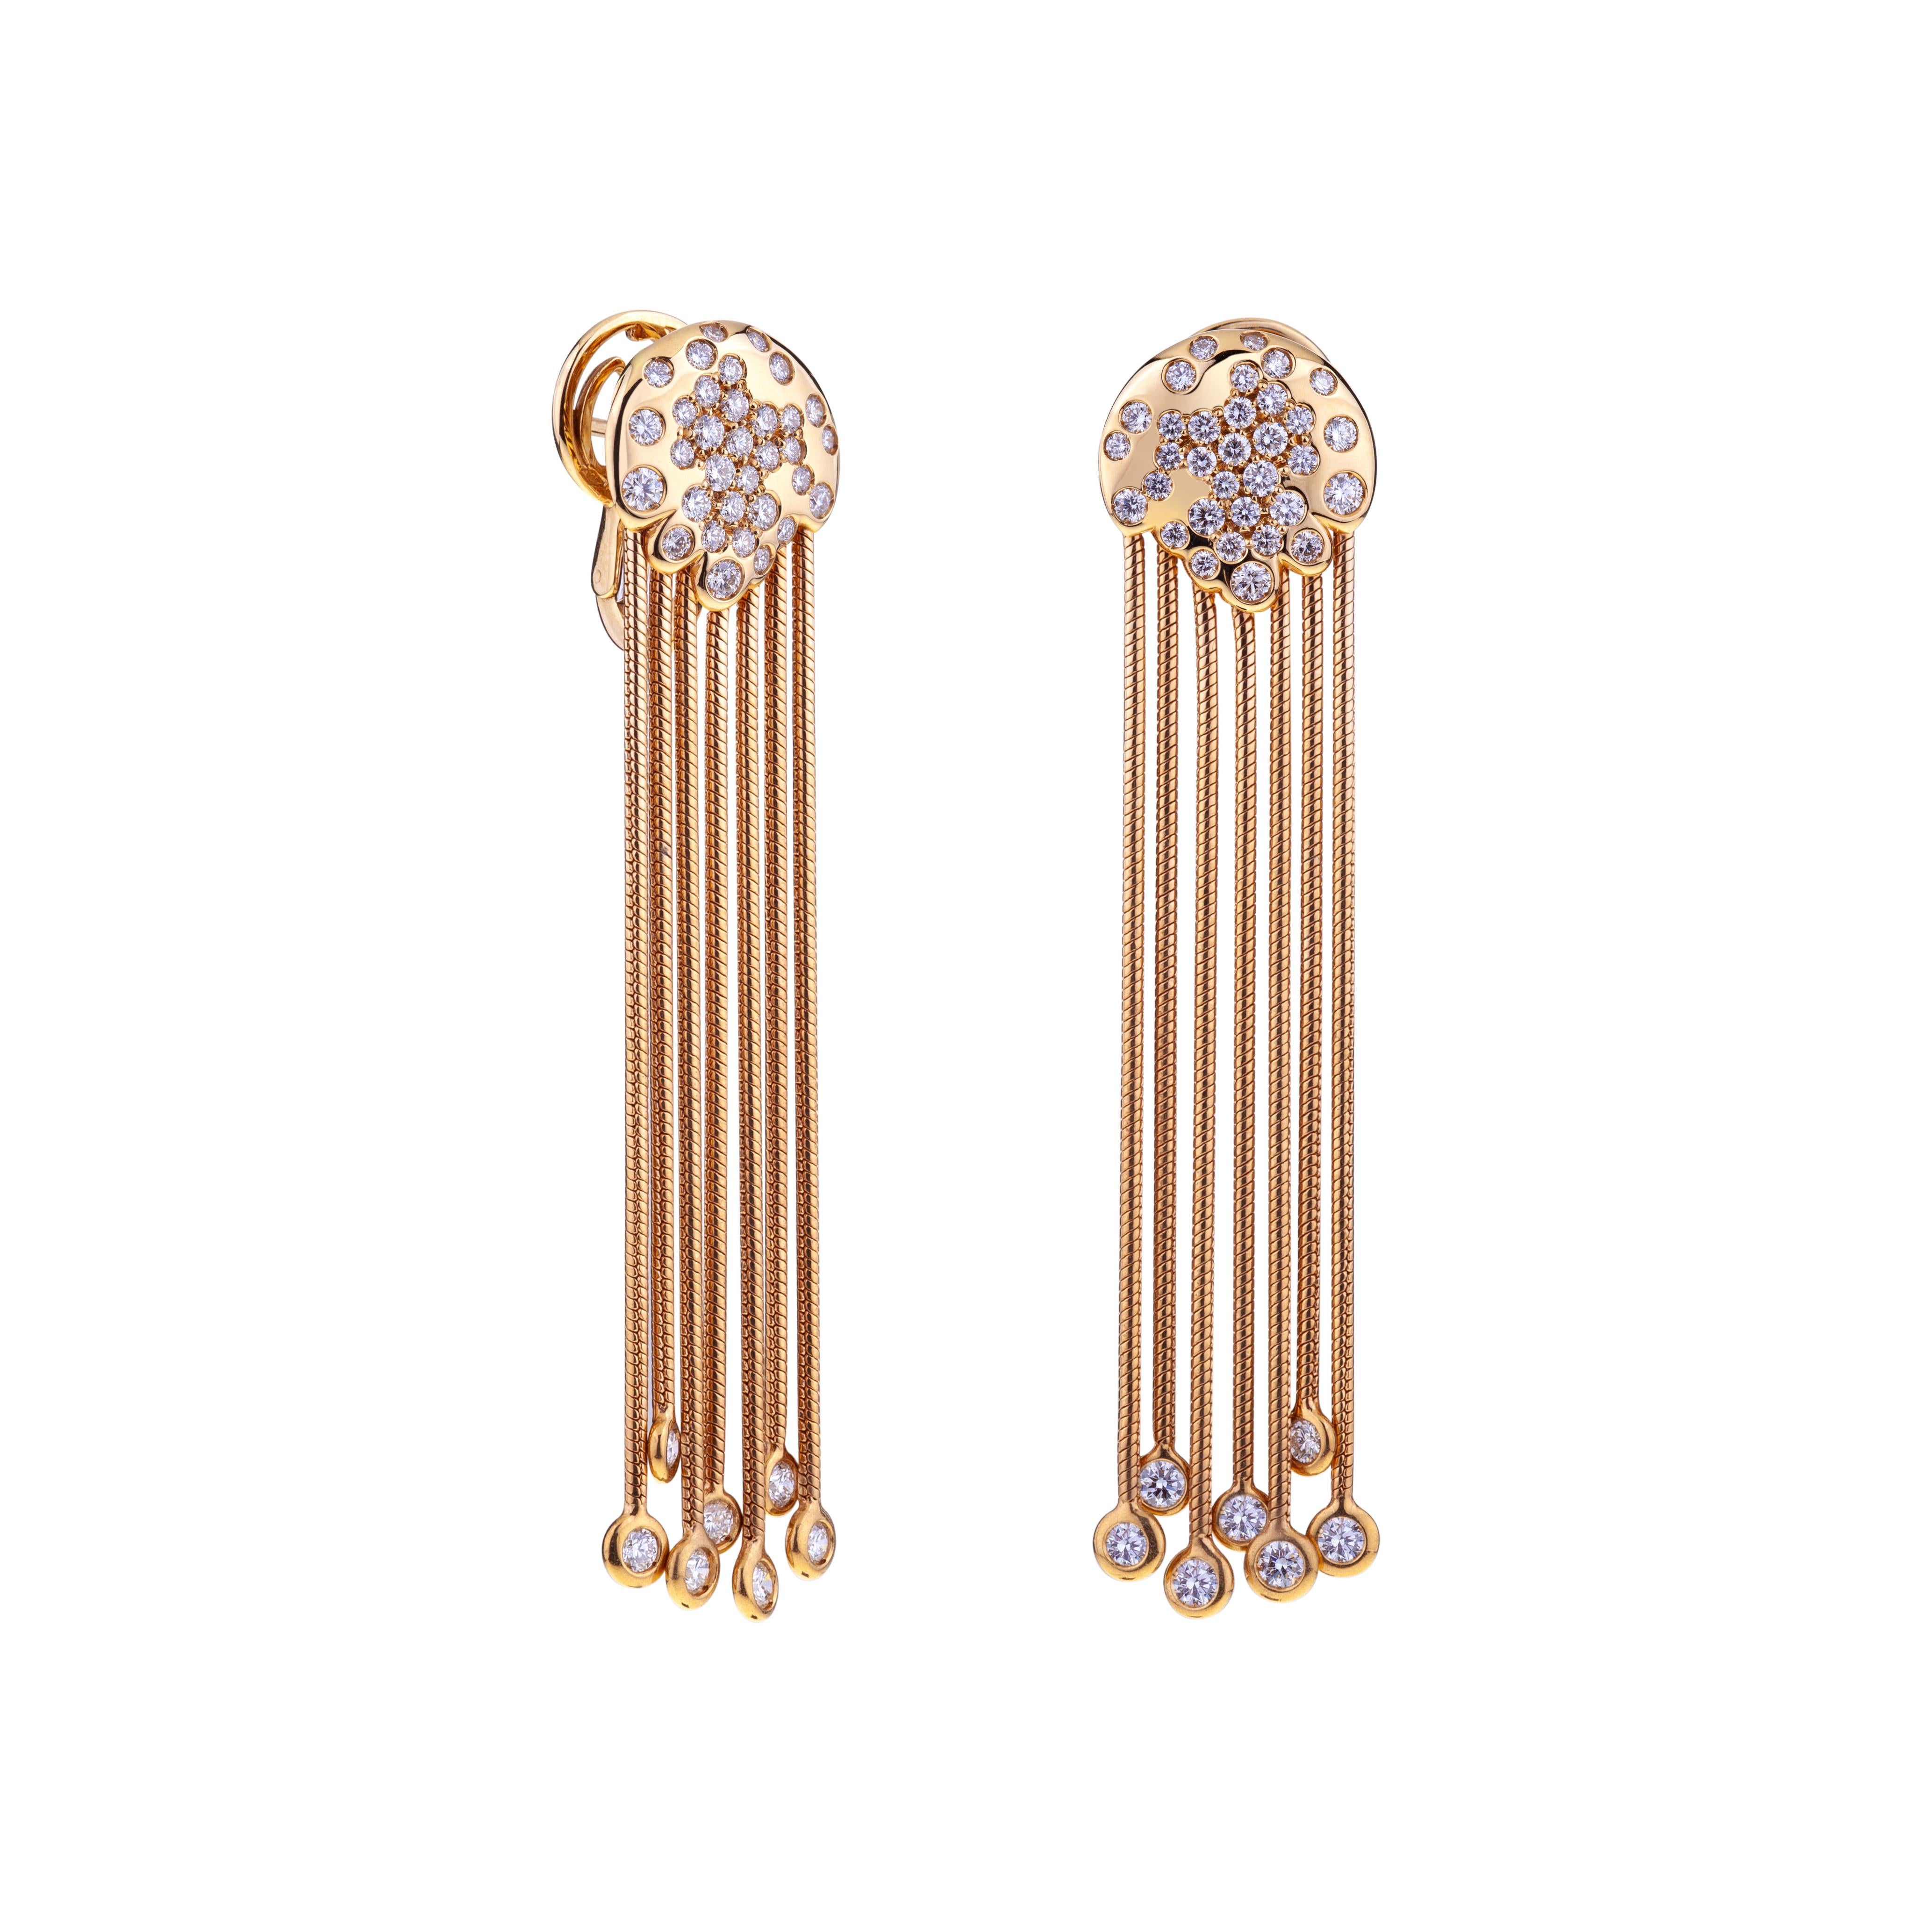 Pendant Rose Gold Earrings with seven threads and diamonds.
Long Pendant Earrings with seven gold threads, pave diamond on a top gold circle and at the bottom of each threads.
The original design recalls the jellyfish shape for sea lovers.  
Pendant